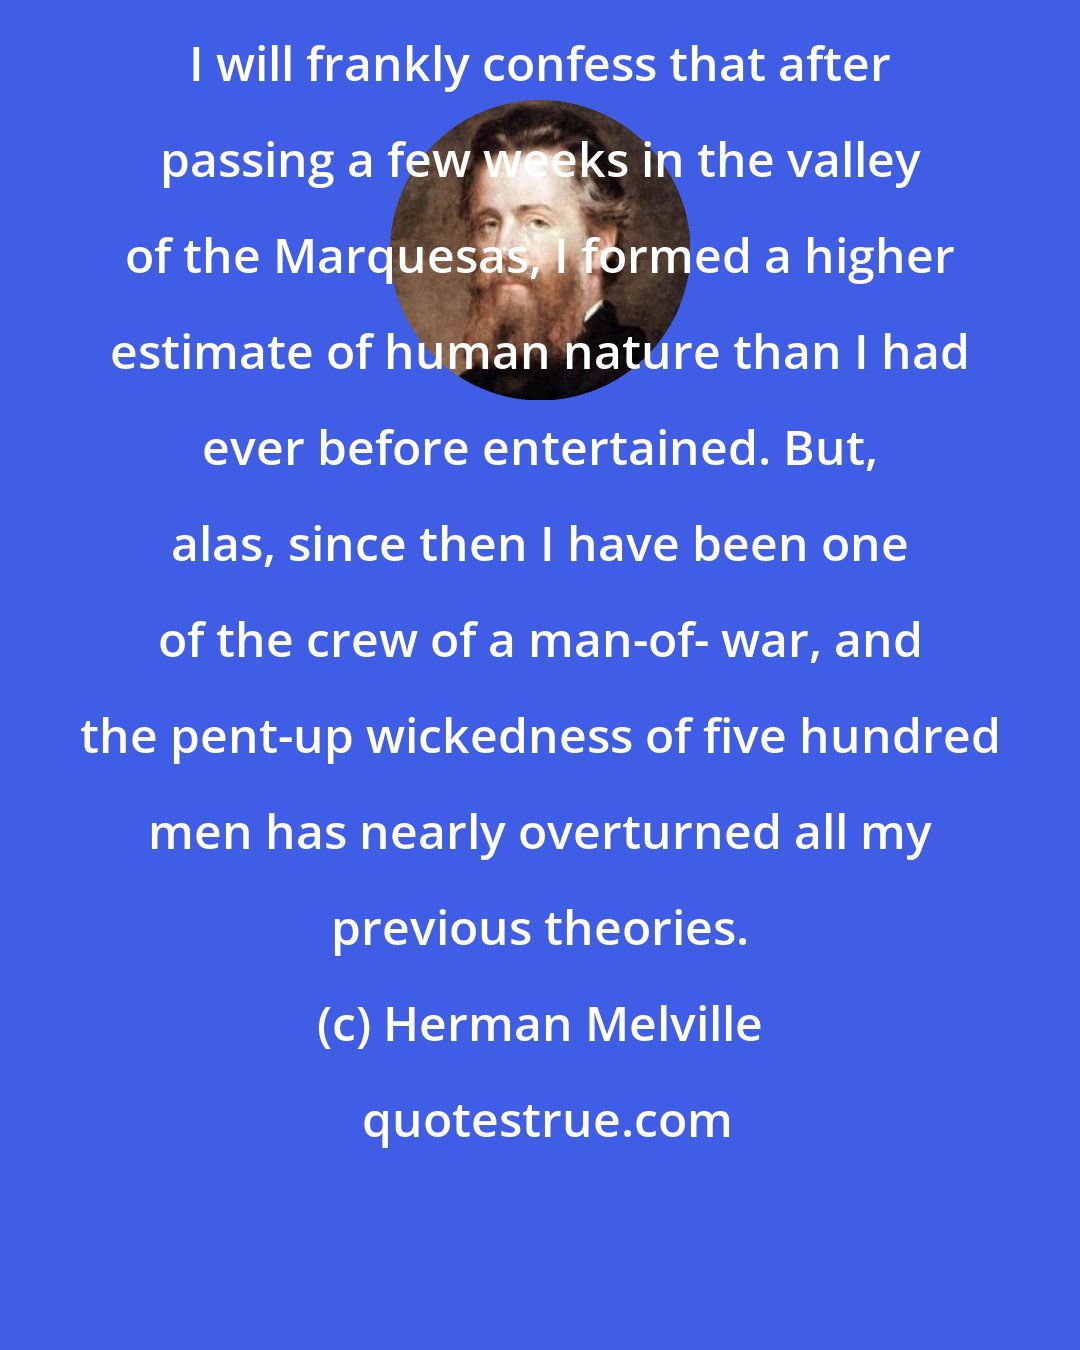 Herman Melville: I will frankly confess that after passing a few weeks in the valley of the Marquesas, I formed a higher estimate of human nature than I had ever before entertained. But, alas, since then I have been one of the crew of a man-of- war, and the pent-up wickedness of five hundred men has nearly overturned all my previous theories.